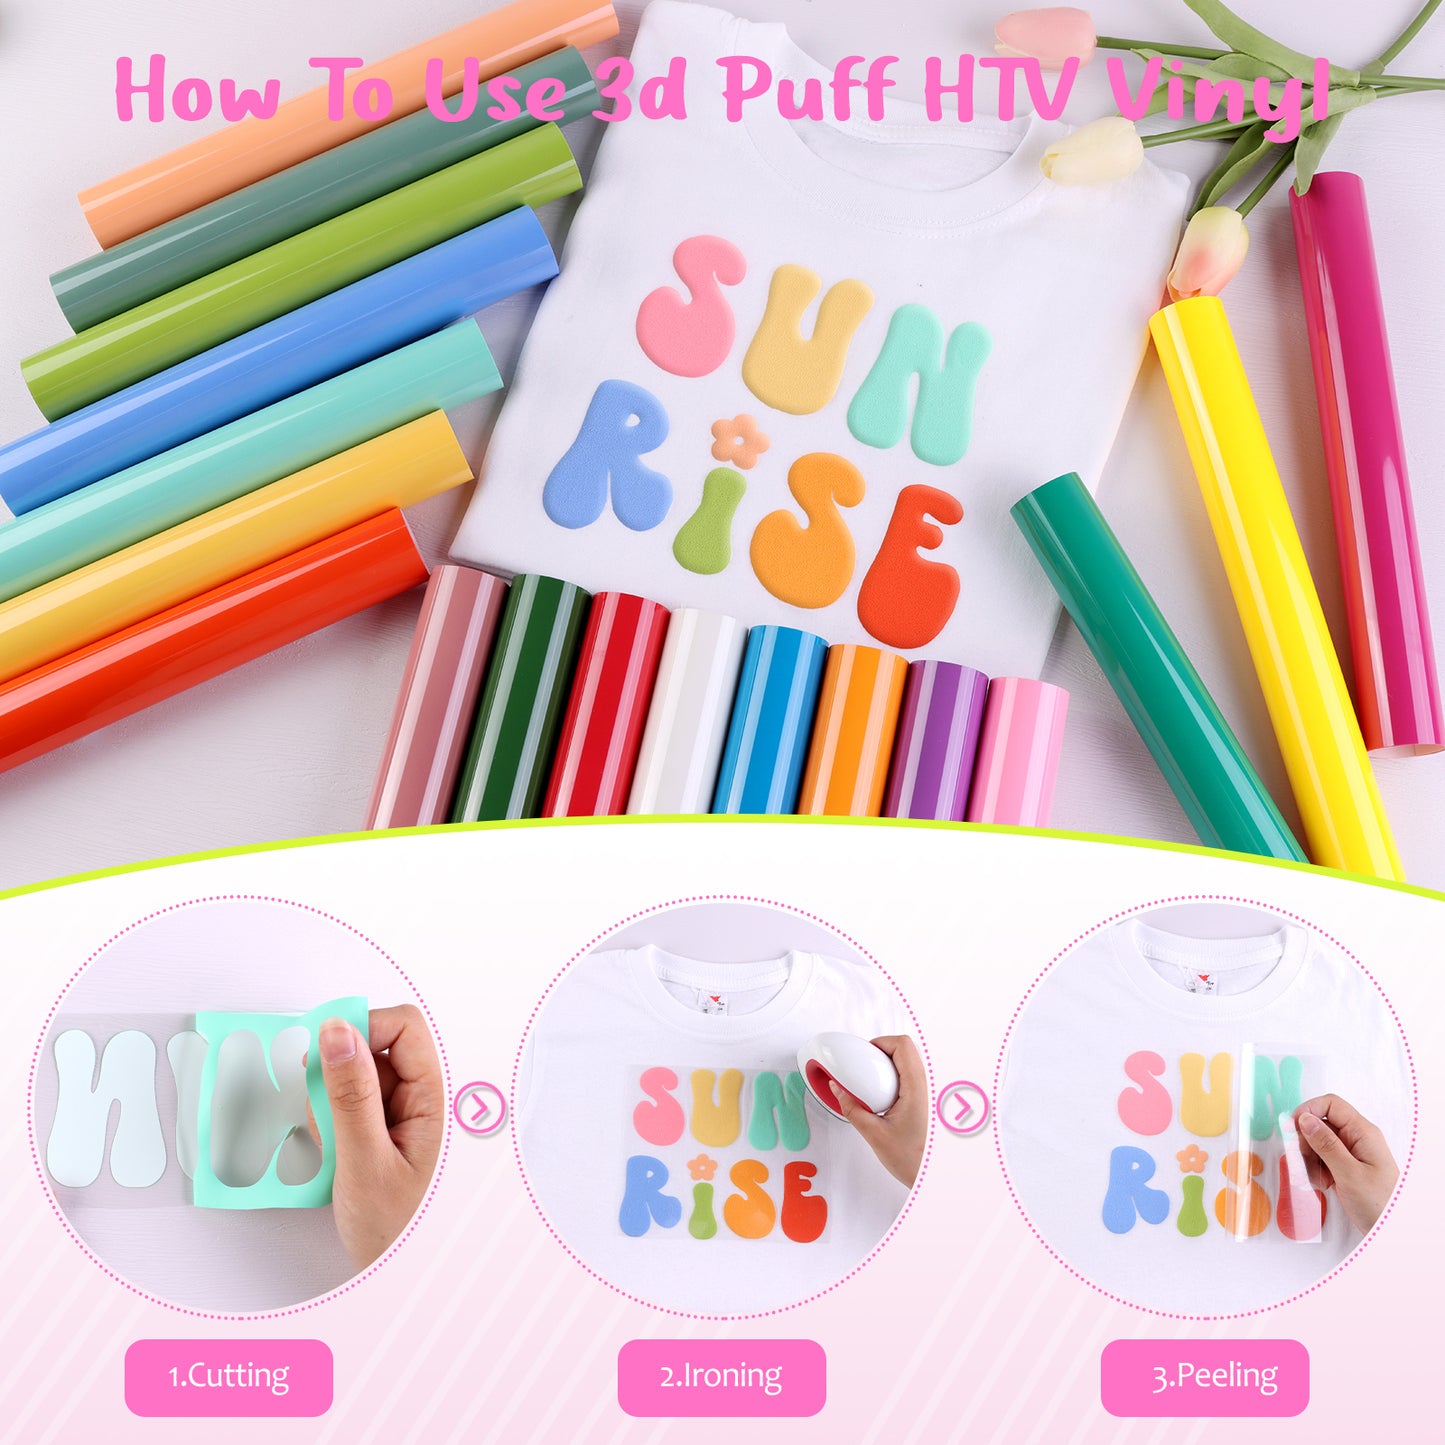 How to use puff HTV the right way. (Hint it shouldn't look like popcor, cricut